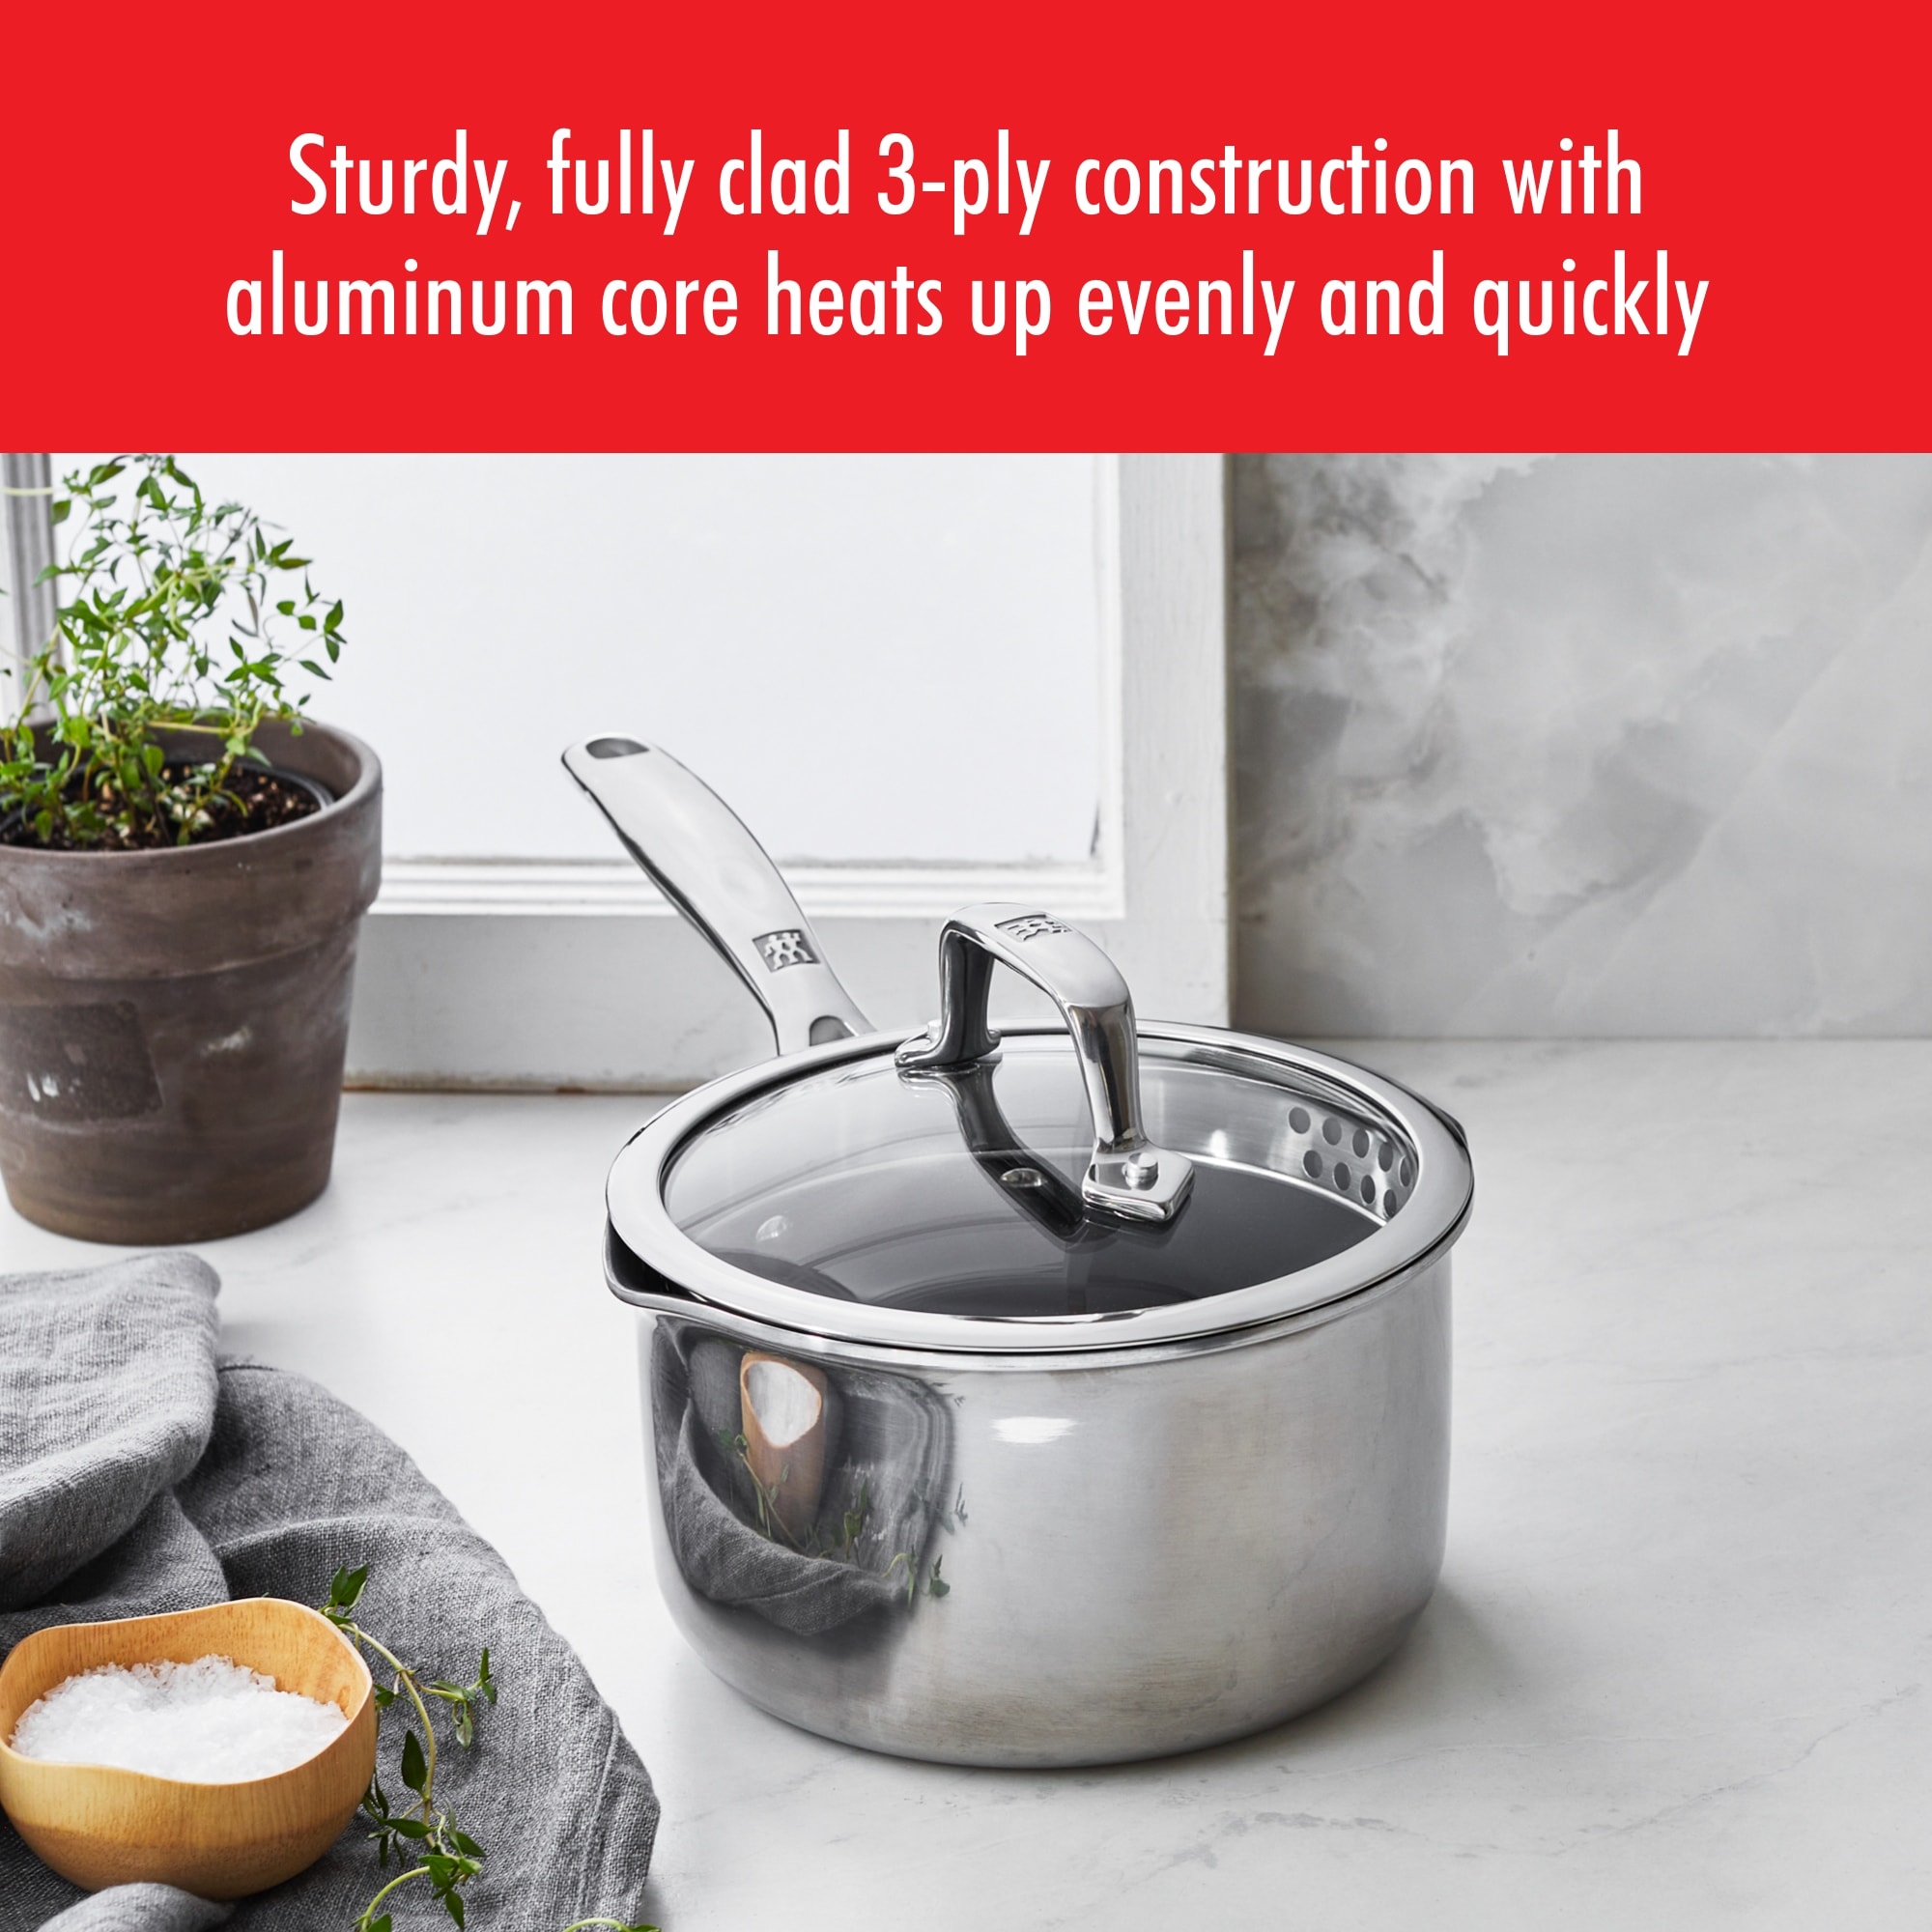 https://ak1.ostkcdn.com/images/products/is/images/direct/c3d66694ab1644ed7bed010e837d32fc546d7269/ZWILLING-Energy-Plus-2-qt-Stainless-Steel-Ceramic-Nonstick-Tall-Saucepan.jpg